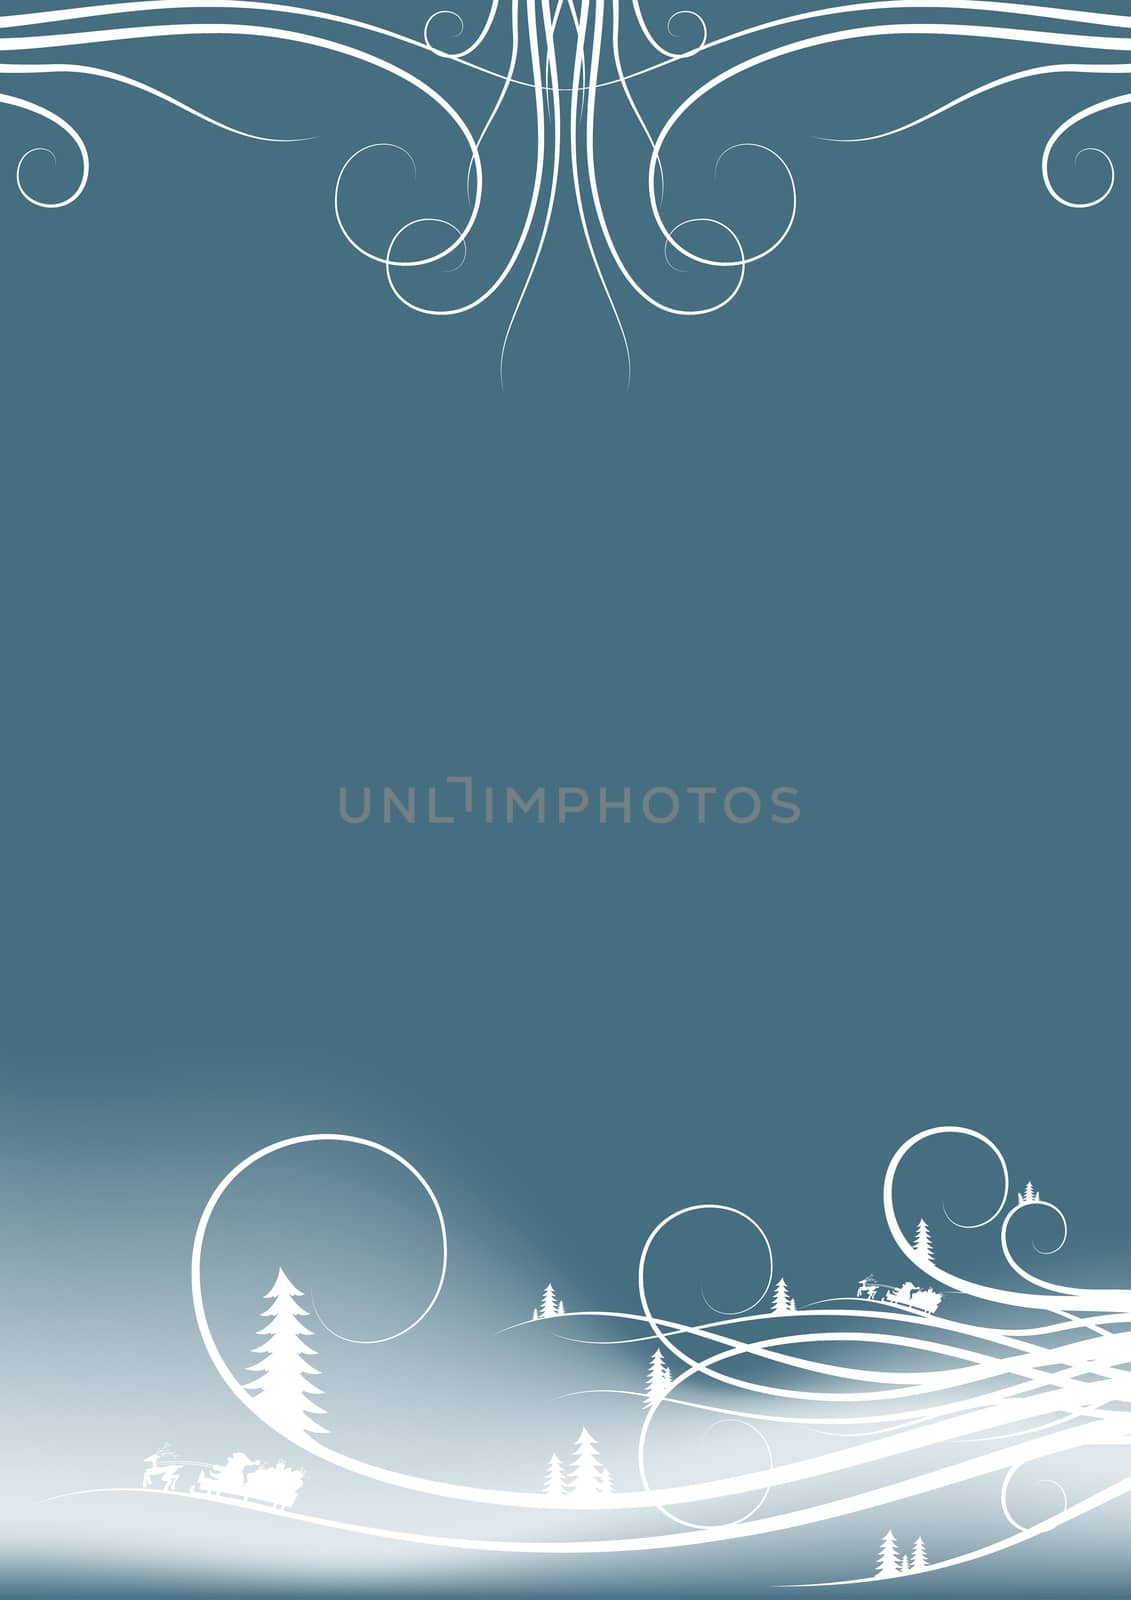 abstract winter background with firtree silhouettes and Santa Claus